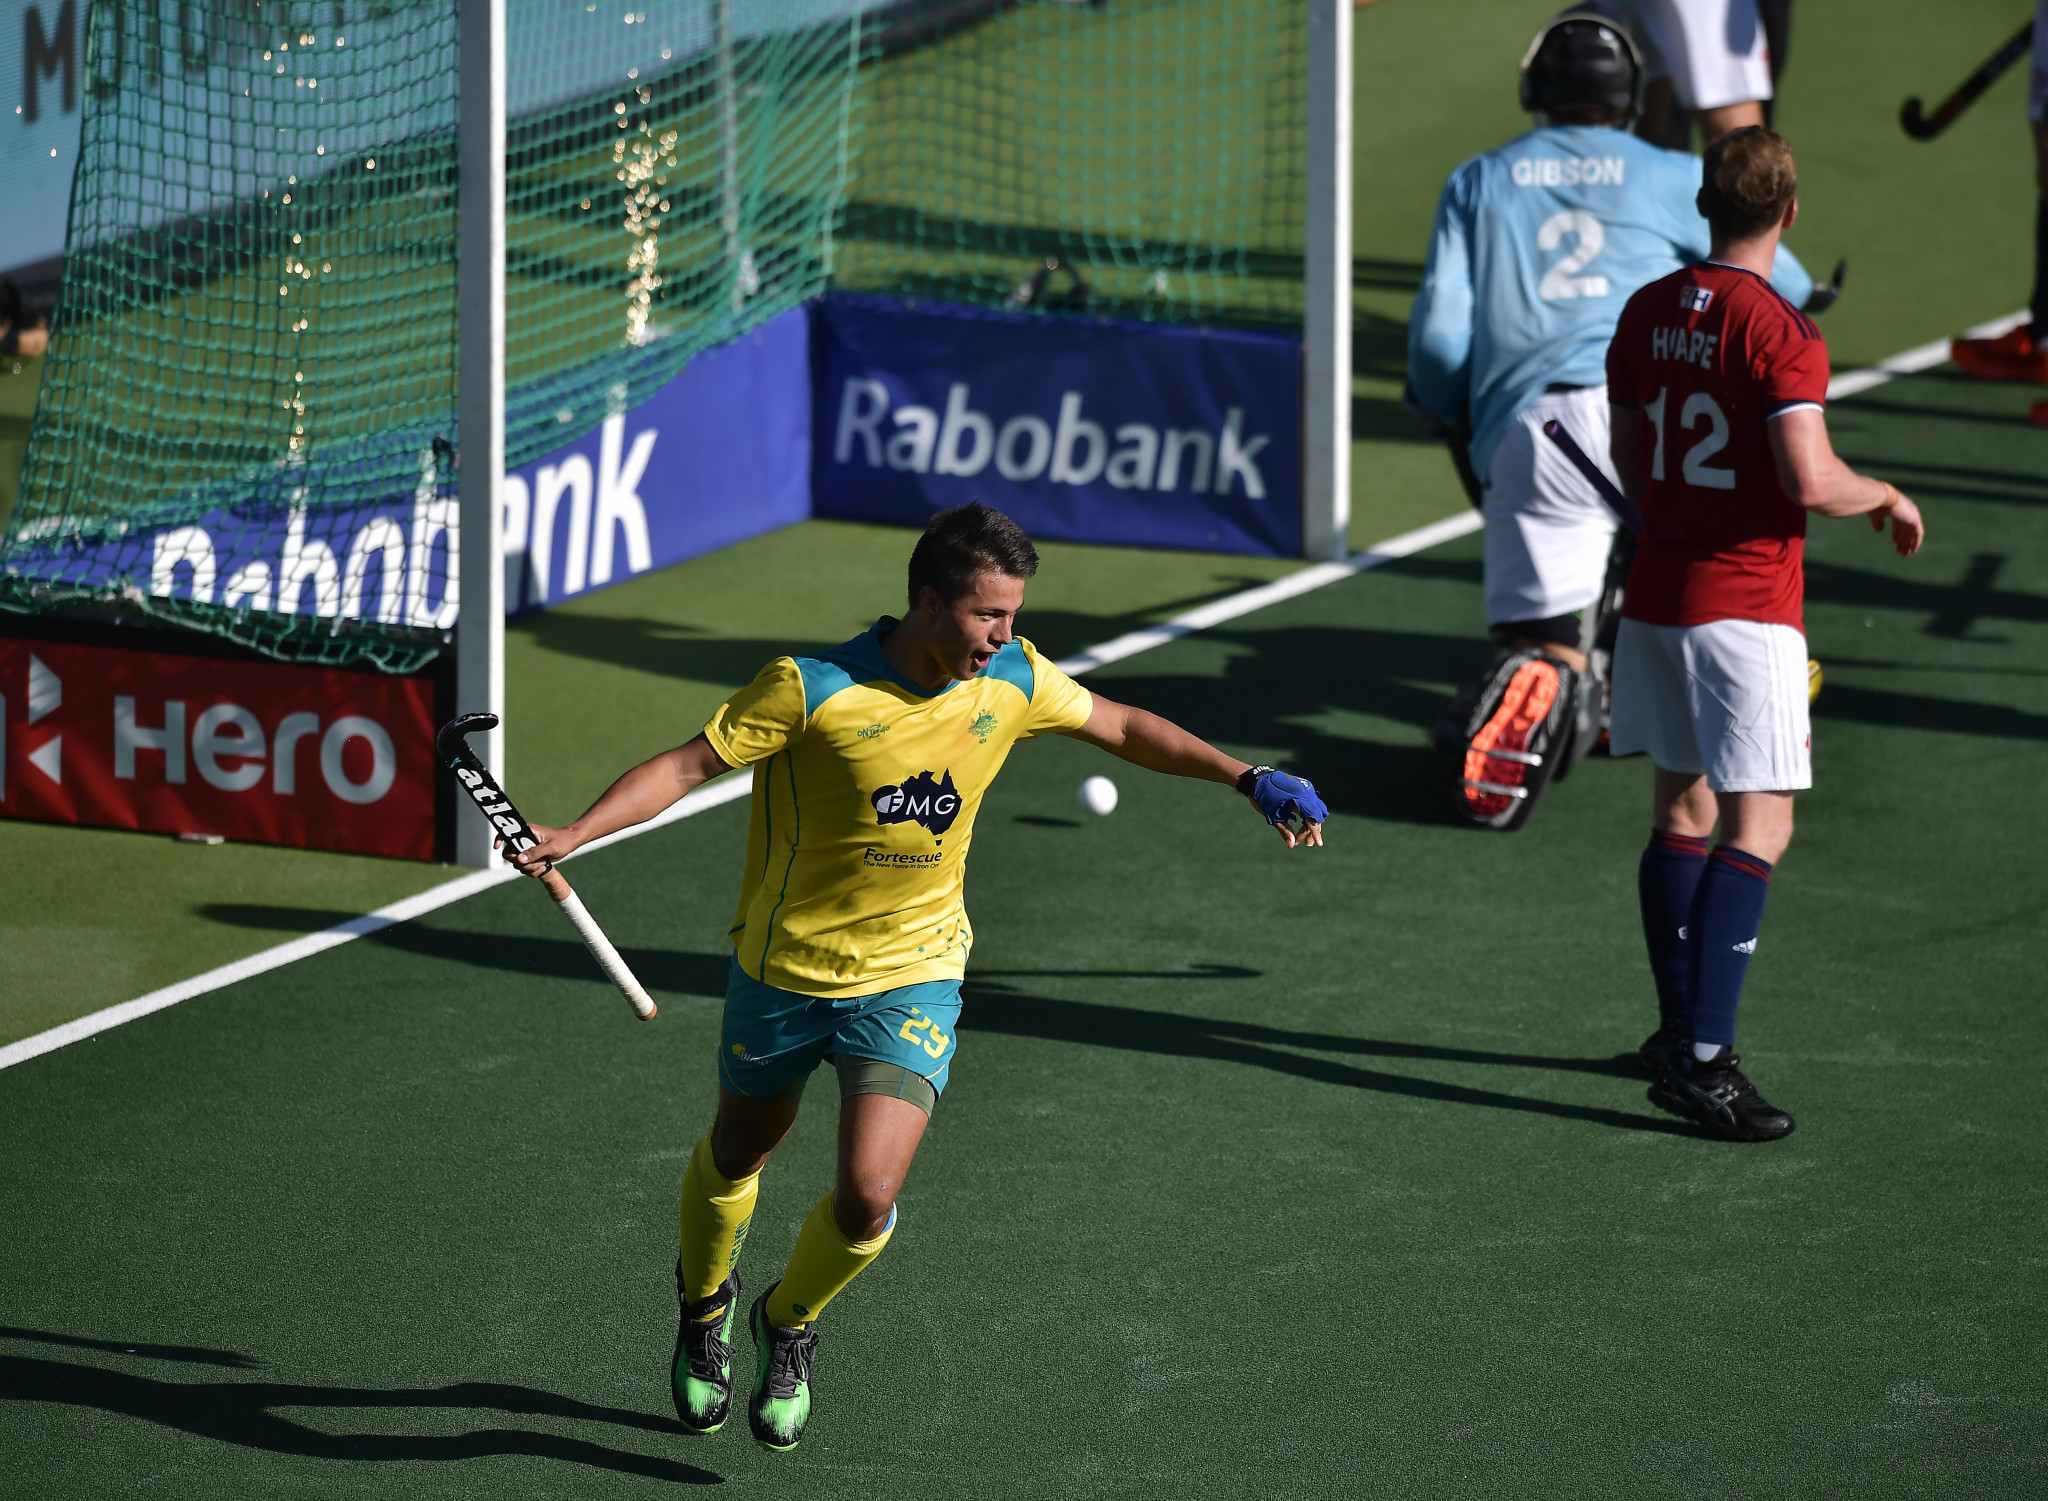 Australia thrashed Britain 6-1 in the first semi-final ©Getty Images